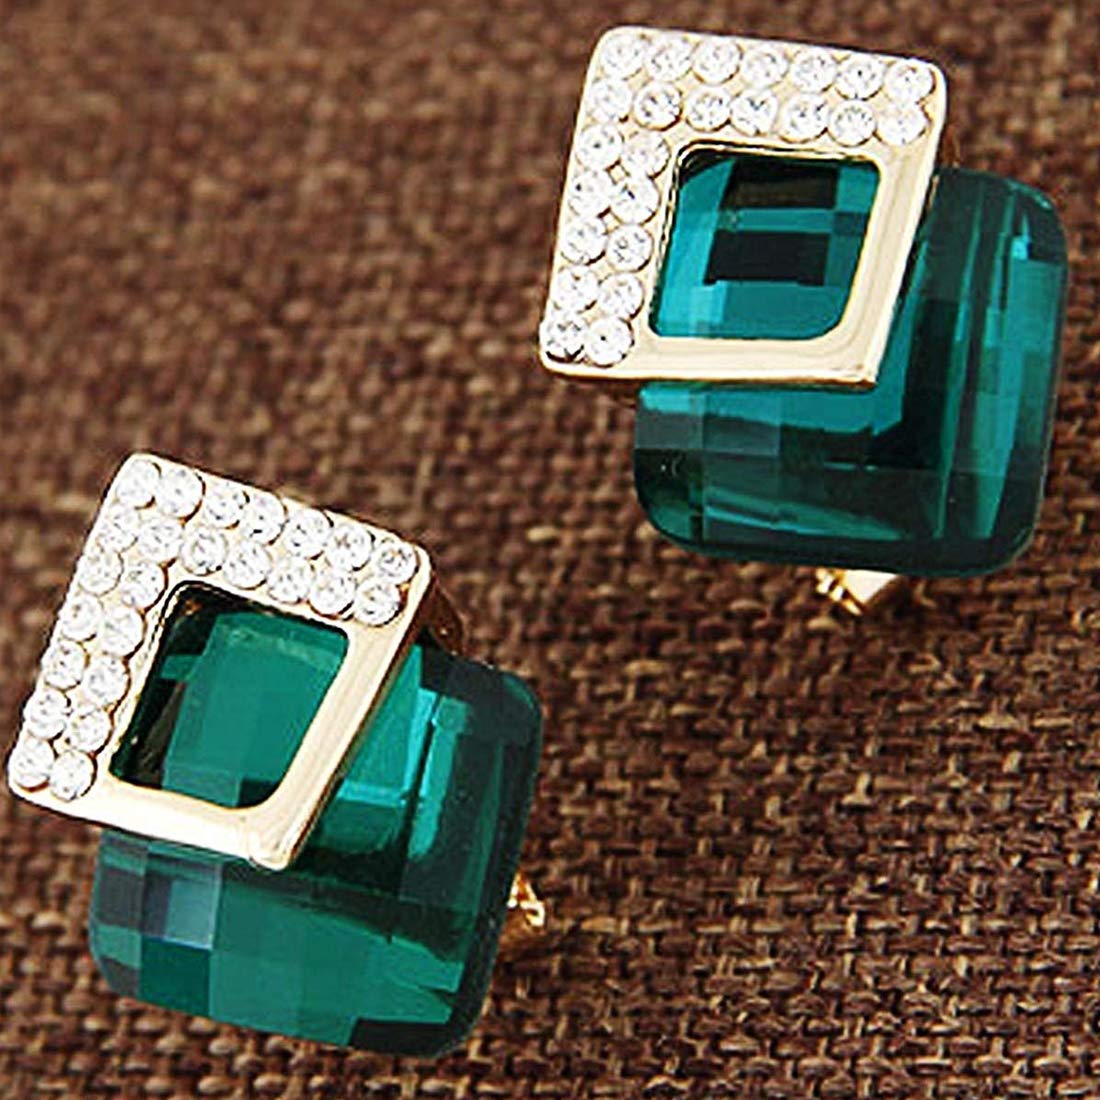 Yellow Chimes Crystal Elements Limited Edition Sparkling AAA Emerald Stunning Stud Earrings For Women